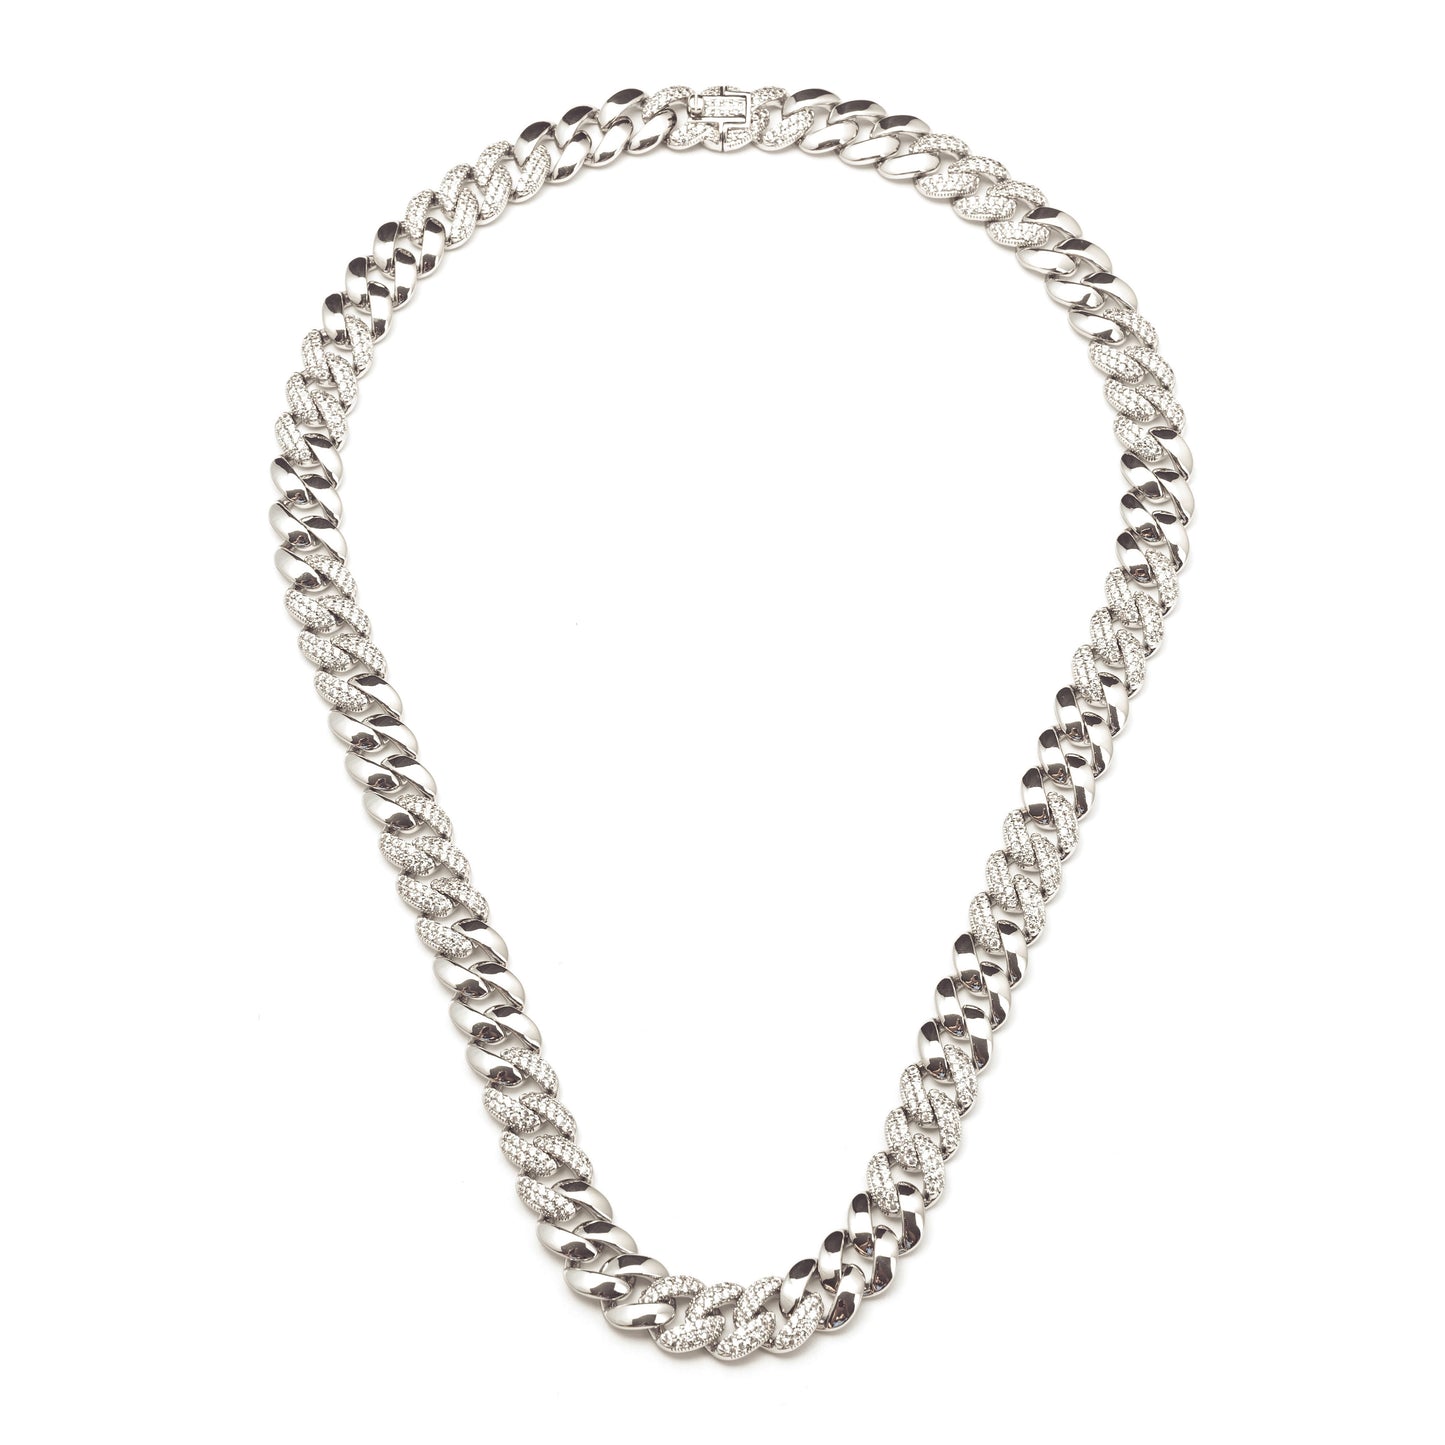 ICONIC CUBAN LINK NECKLACE